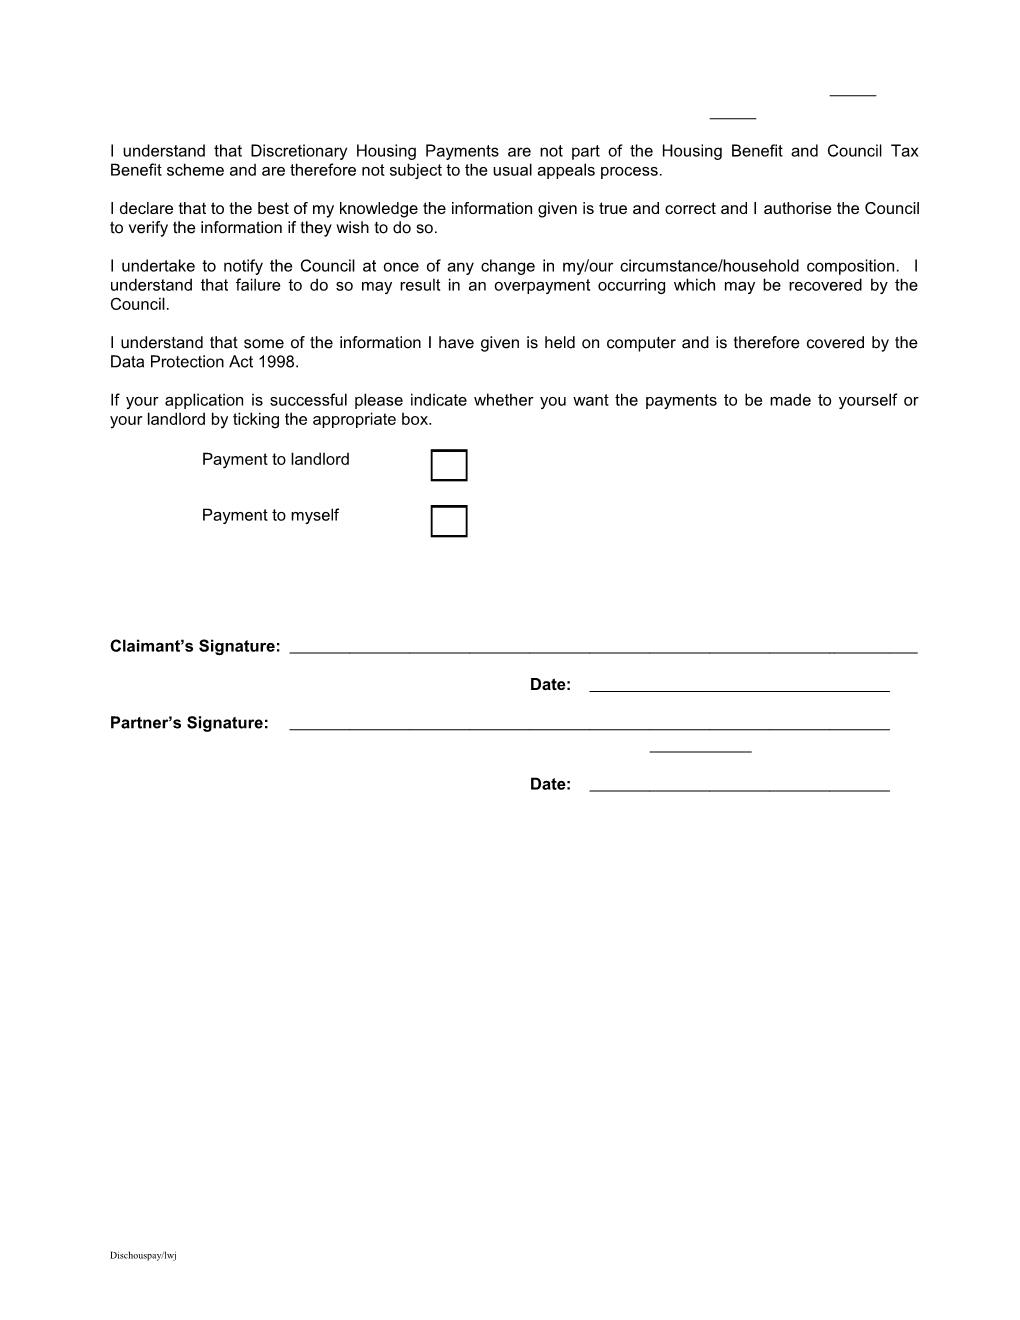 Application for Discretionary Housing Payment